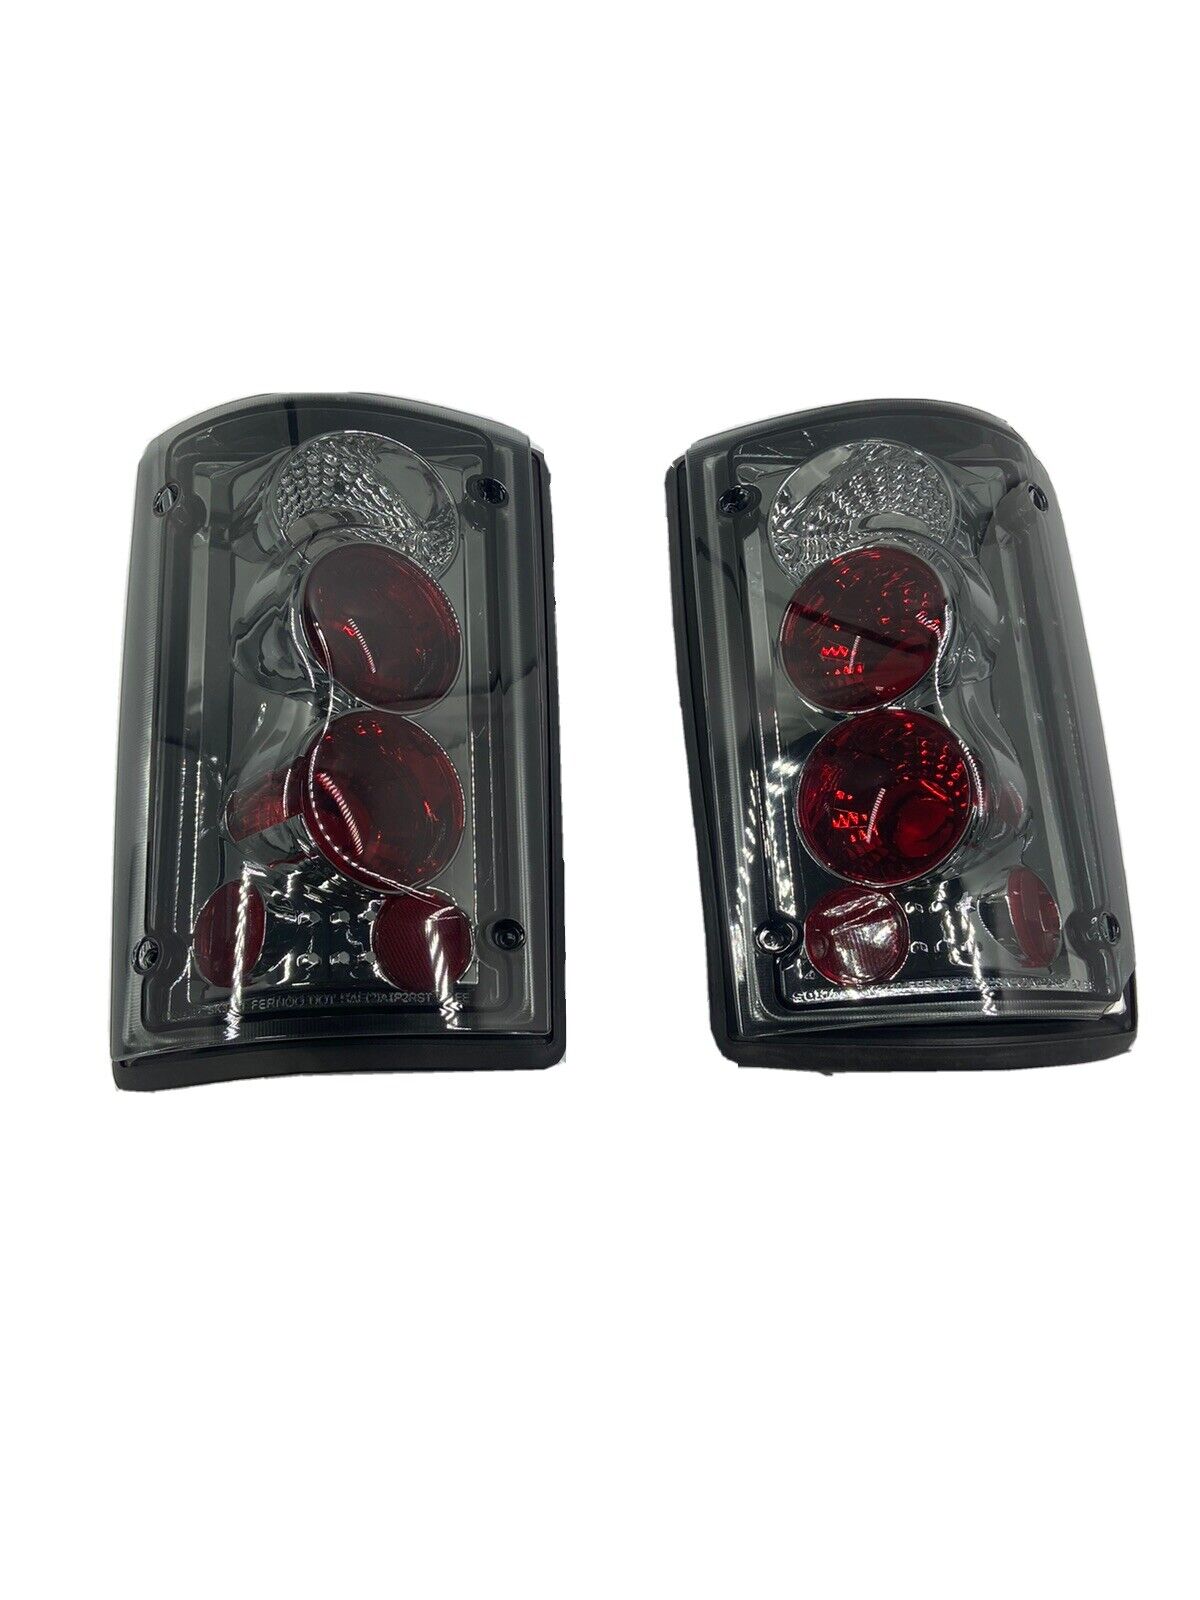 Spyder For Ford E-150/250/350 Econoline 1995-2002 Euro Tail Lights Pair | Smoke